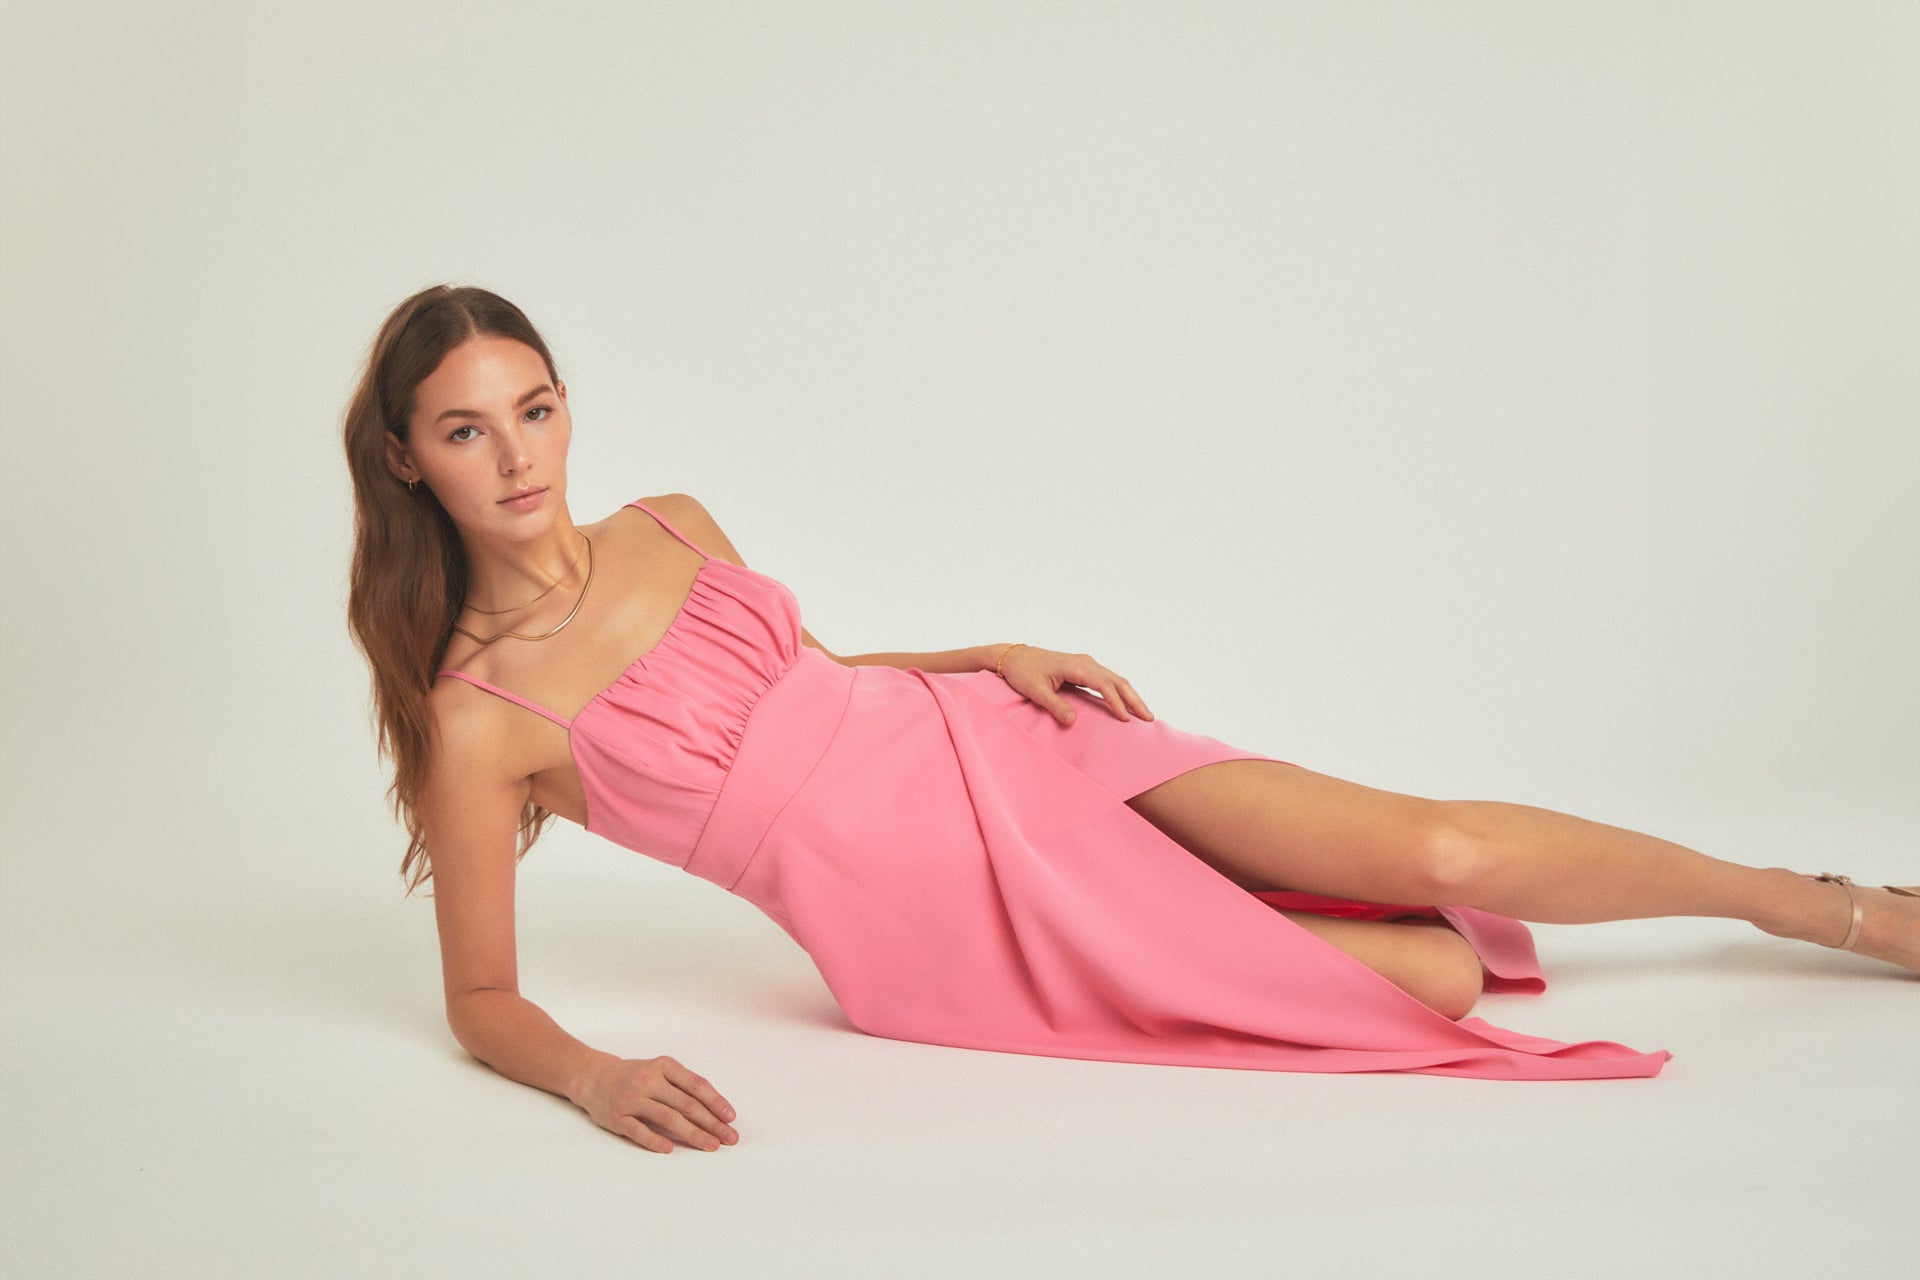 Explore the Spring Capsule Collection in Women's Clothing from Endless Rose at endlessrose.com